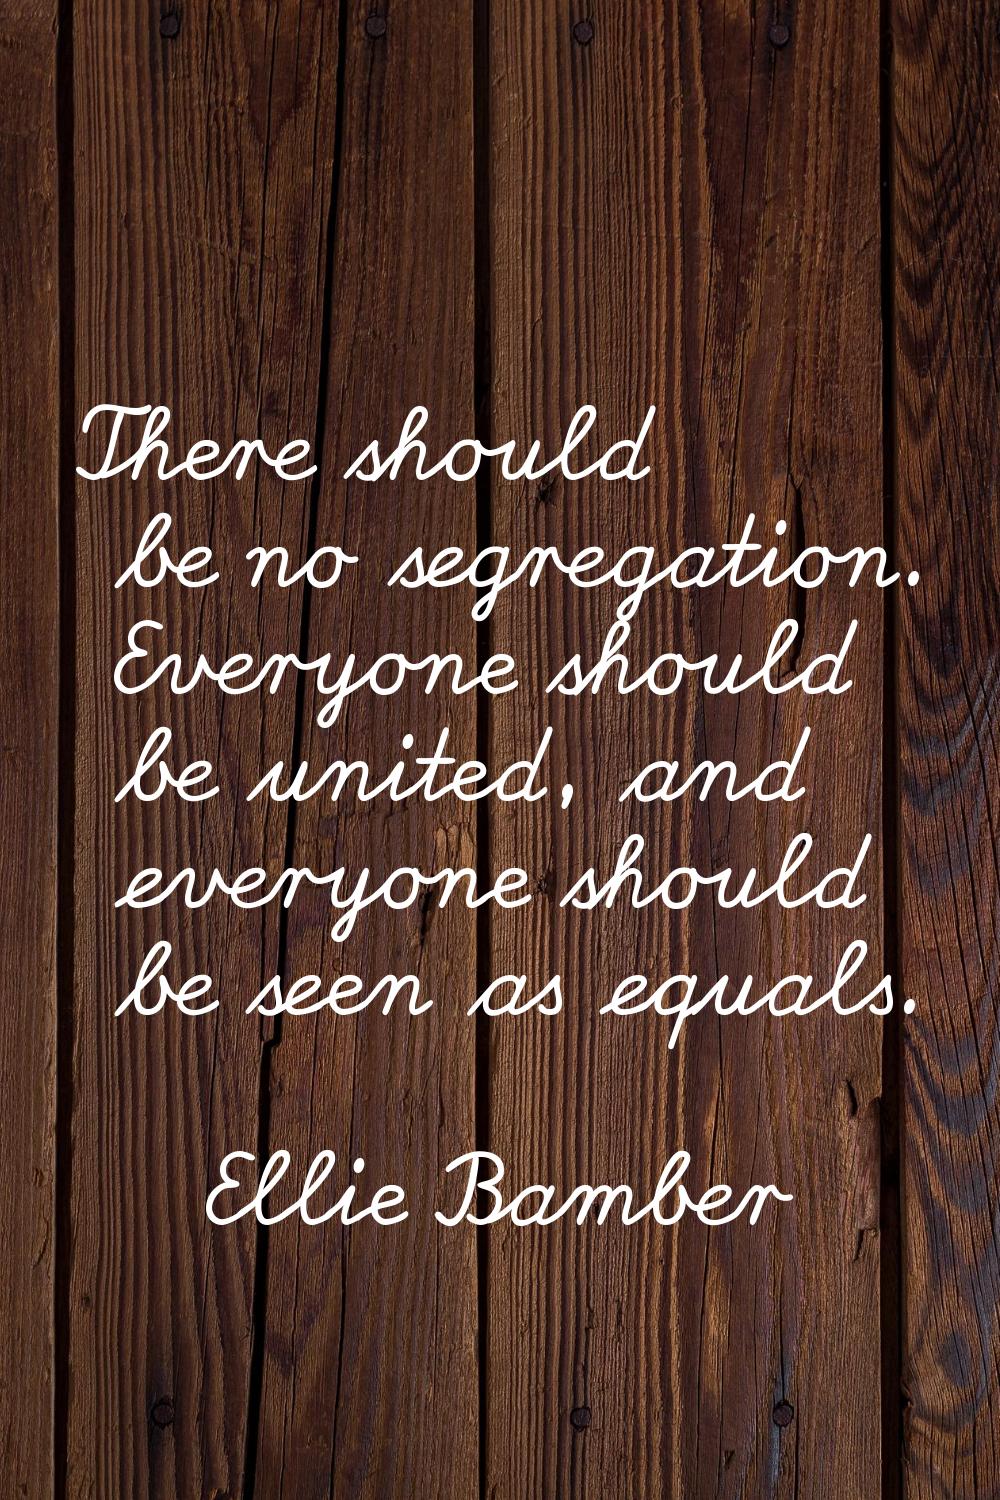 There should be no segregation. Everyone should be united, and everyone should be seen as equals.